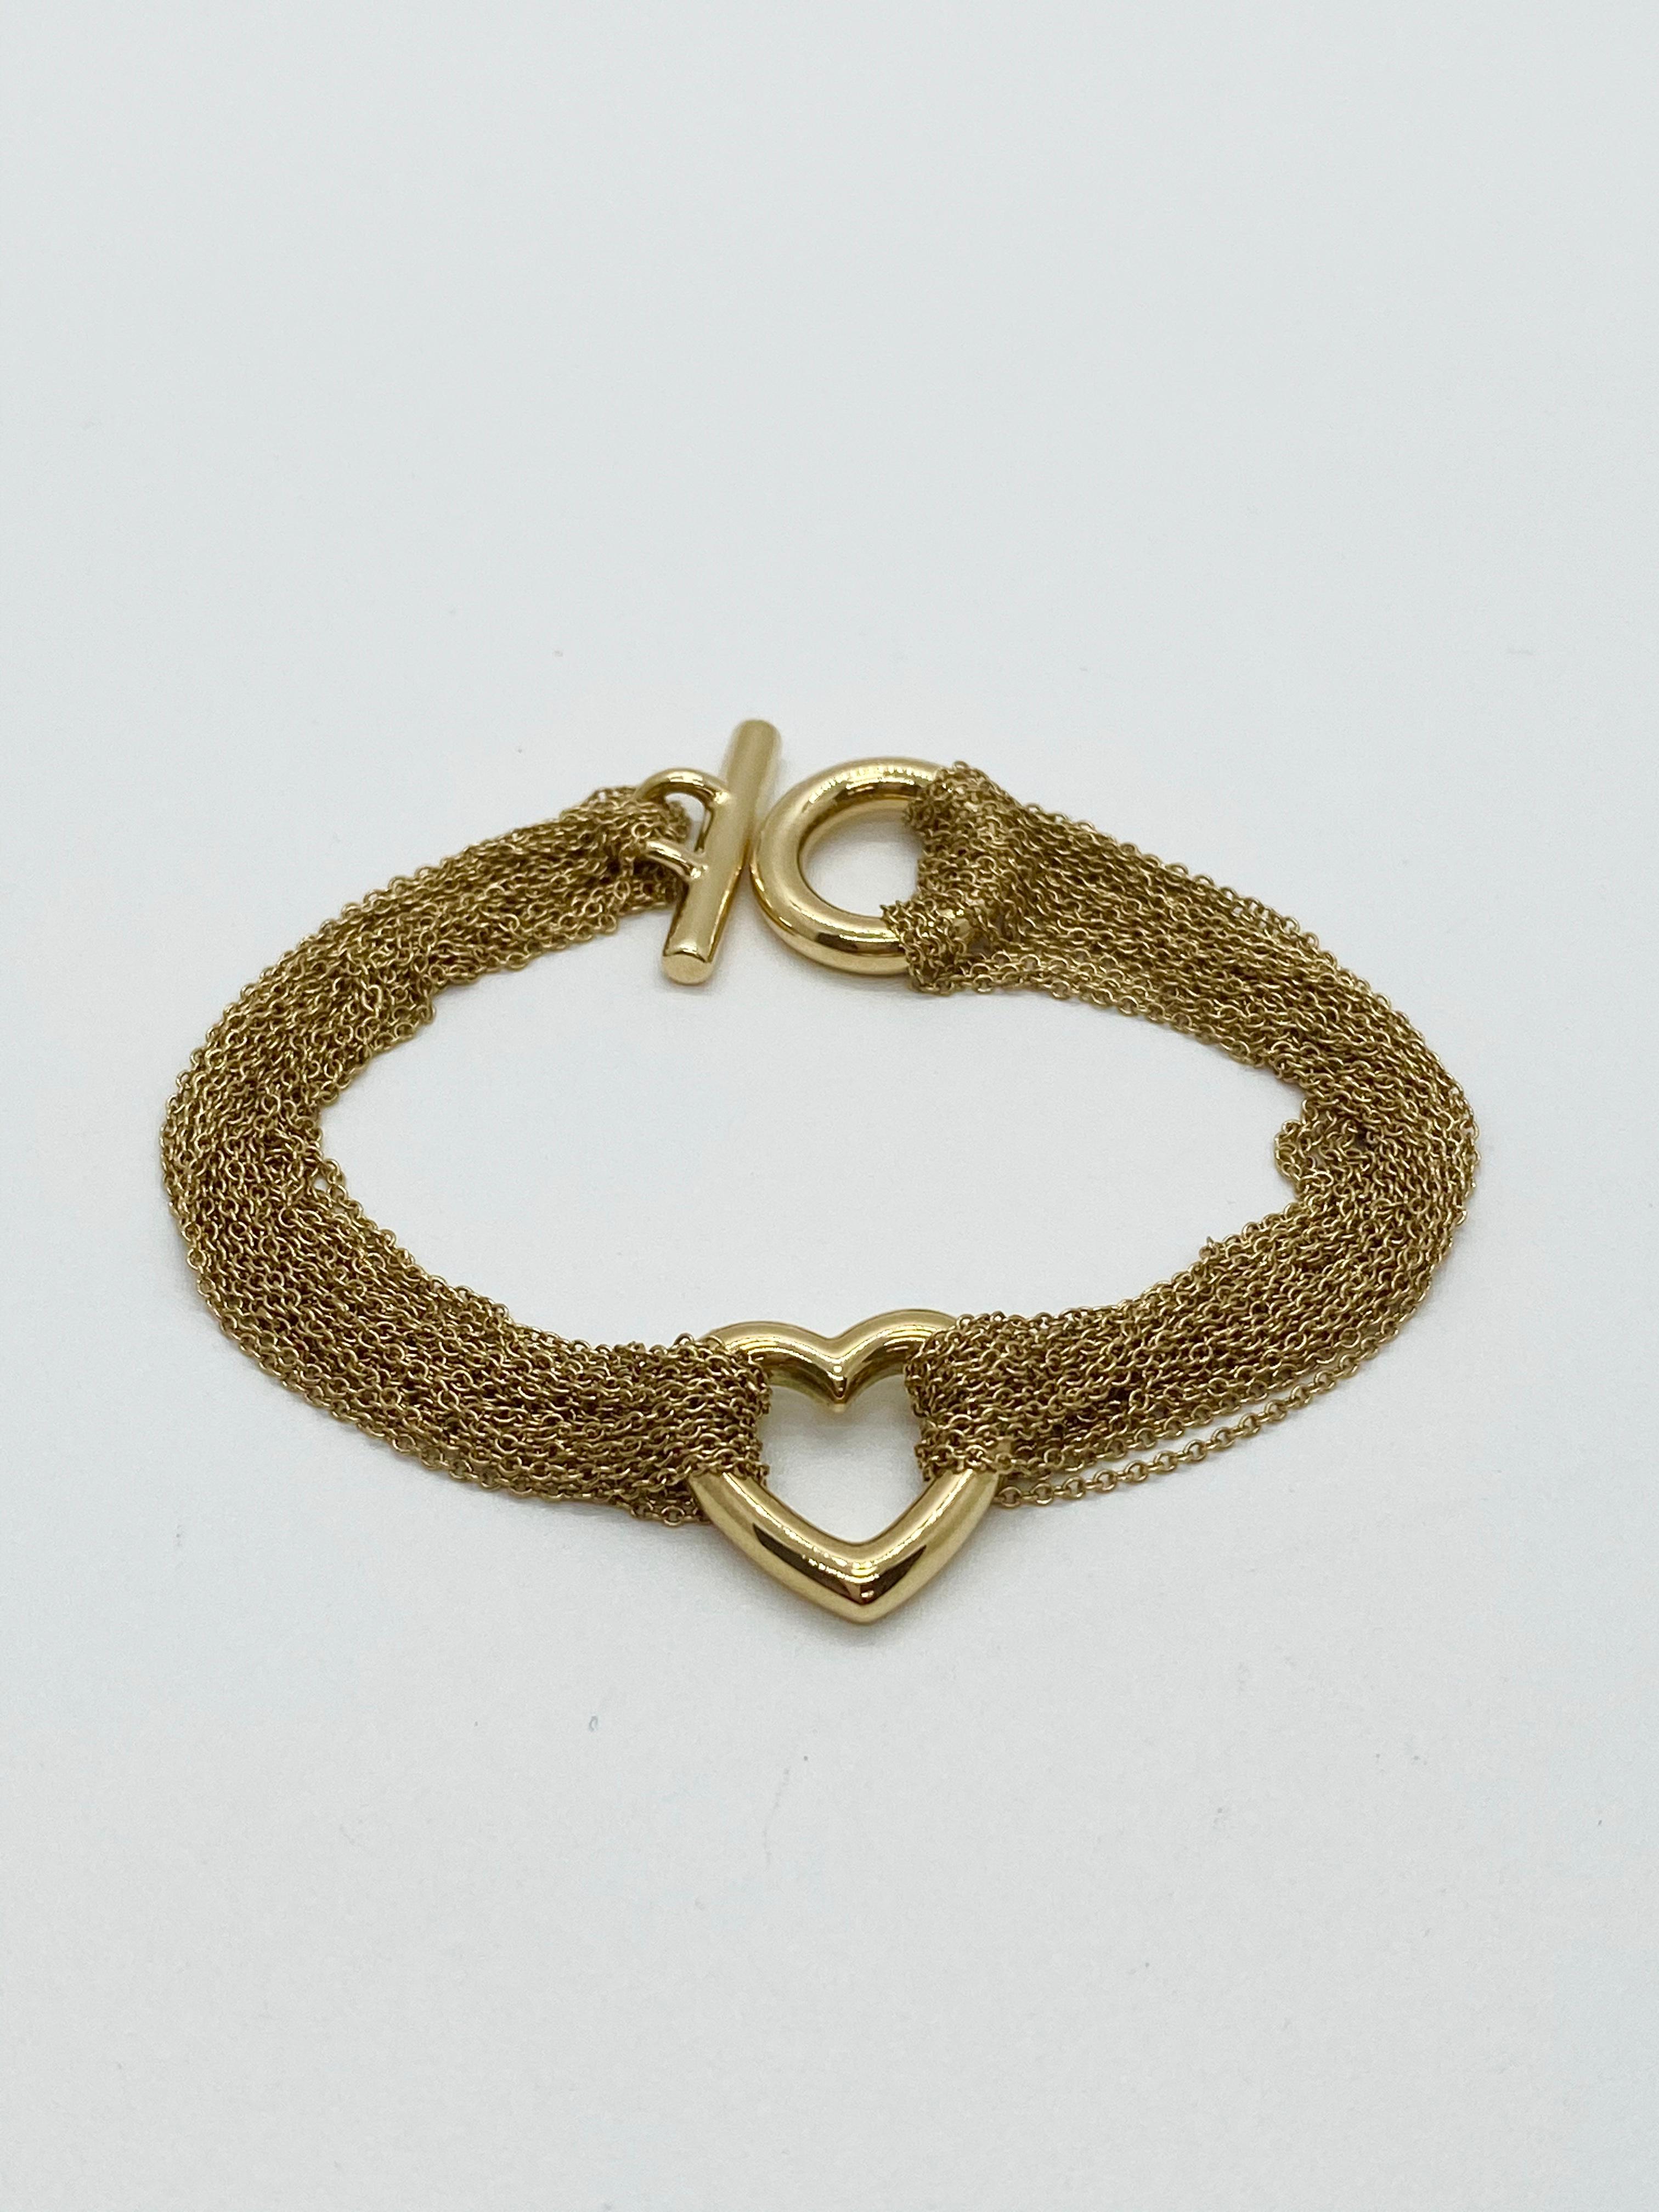 Vintage Tiffany & Co 18k yellow gold heart mesh bracelet.  Bracelet consists of multi strands of cable link chain in 18k yellow gold with 1.25 inch heart charm.  Bracelet length is 7 inches and has a toggle clasp.  